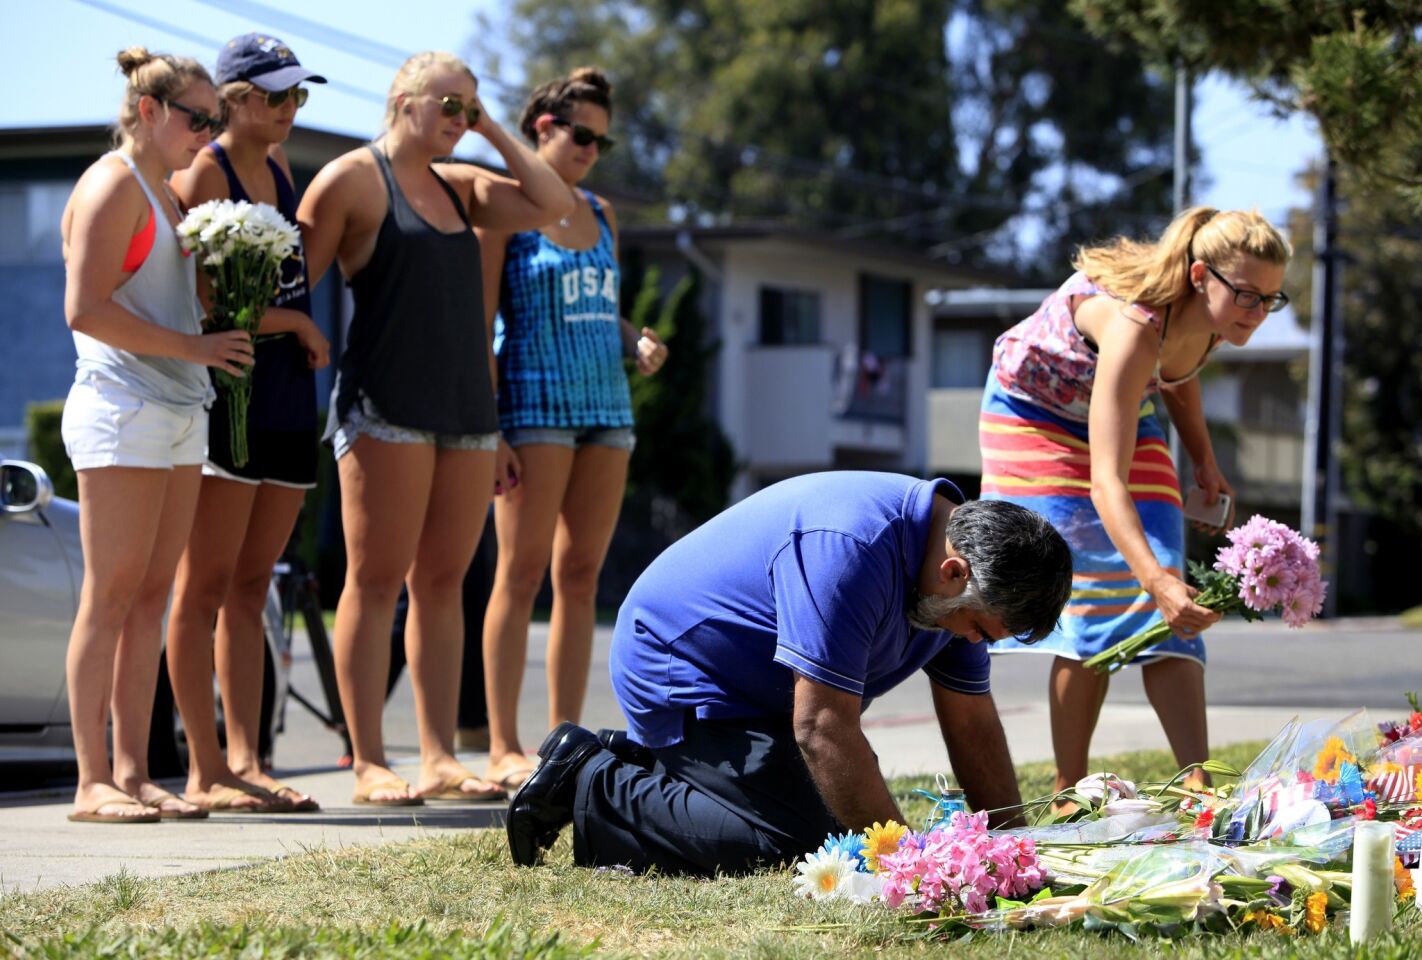 Jose Cardoso, 50, cries and prays next to flowers in front of the Alpha Phi sorority house, which was targeted in the rampage. He said he has a local printing shop and has done a lot of work for the fraternities and sororities. He said he thinks of the students as his own children.